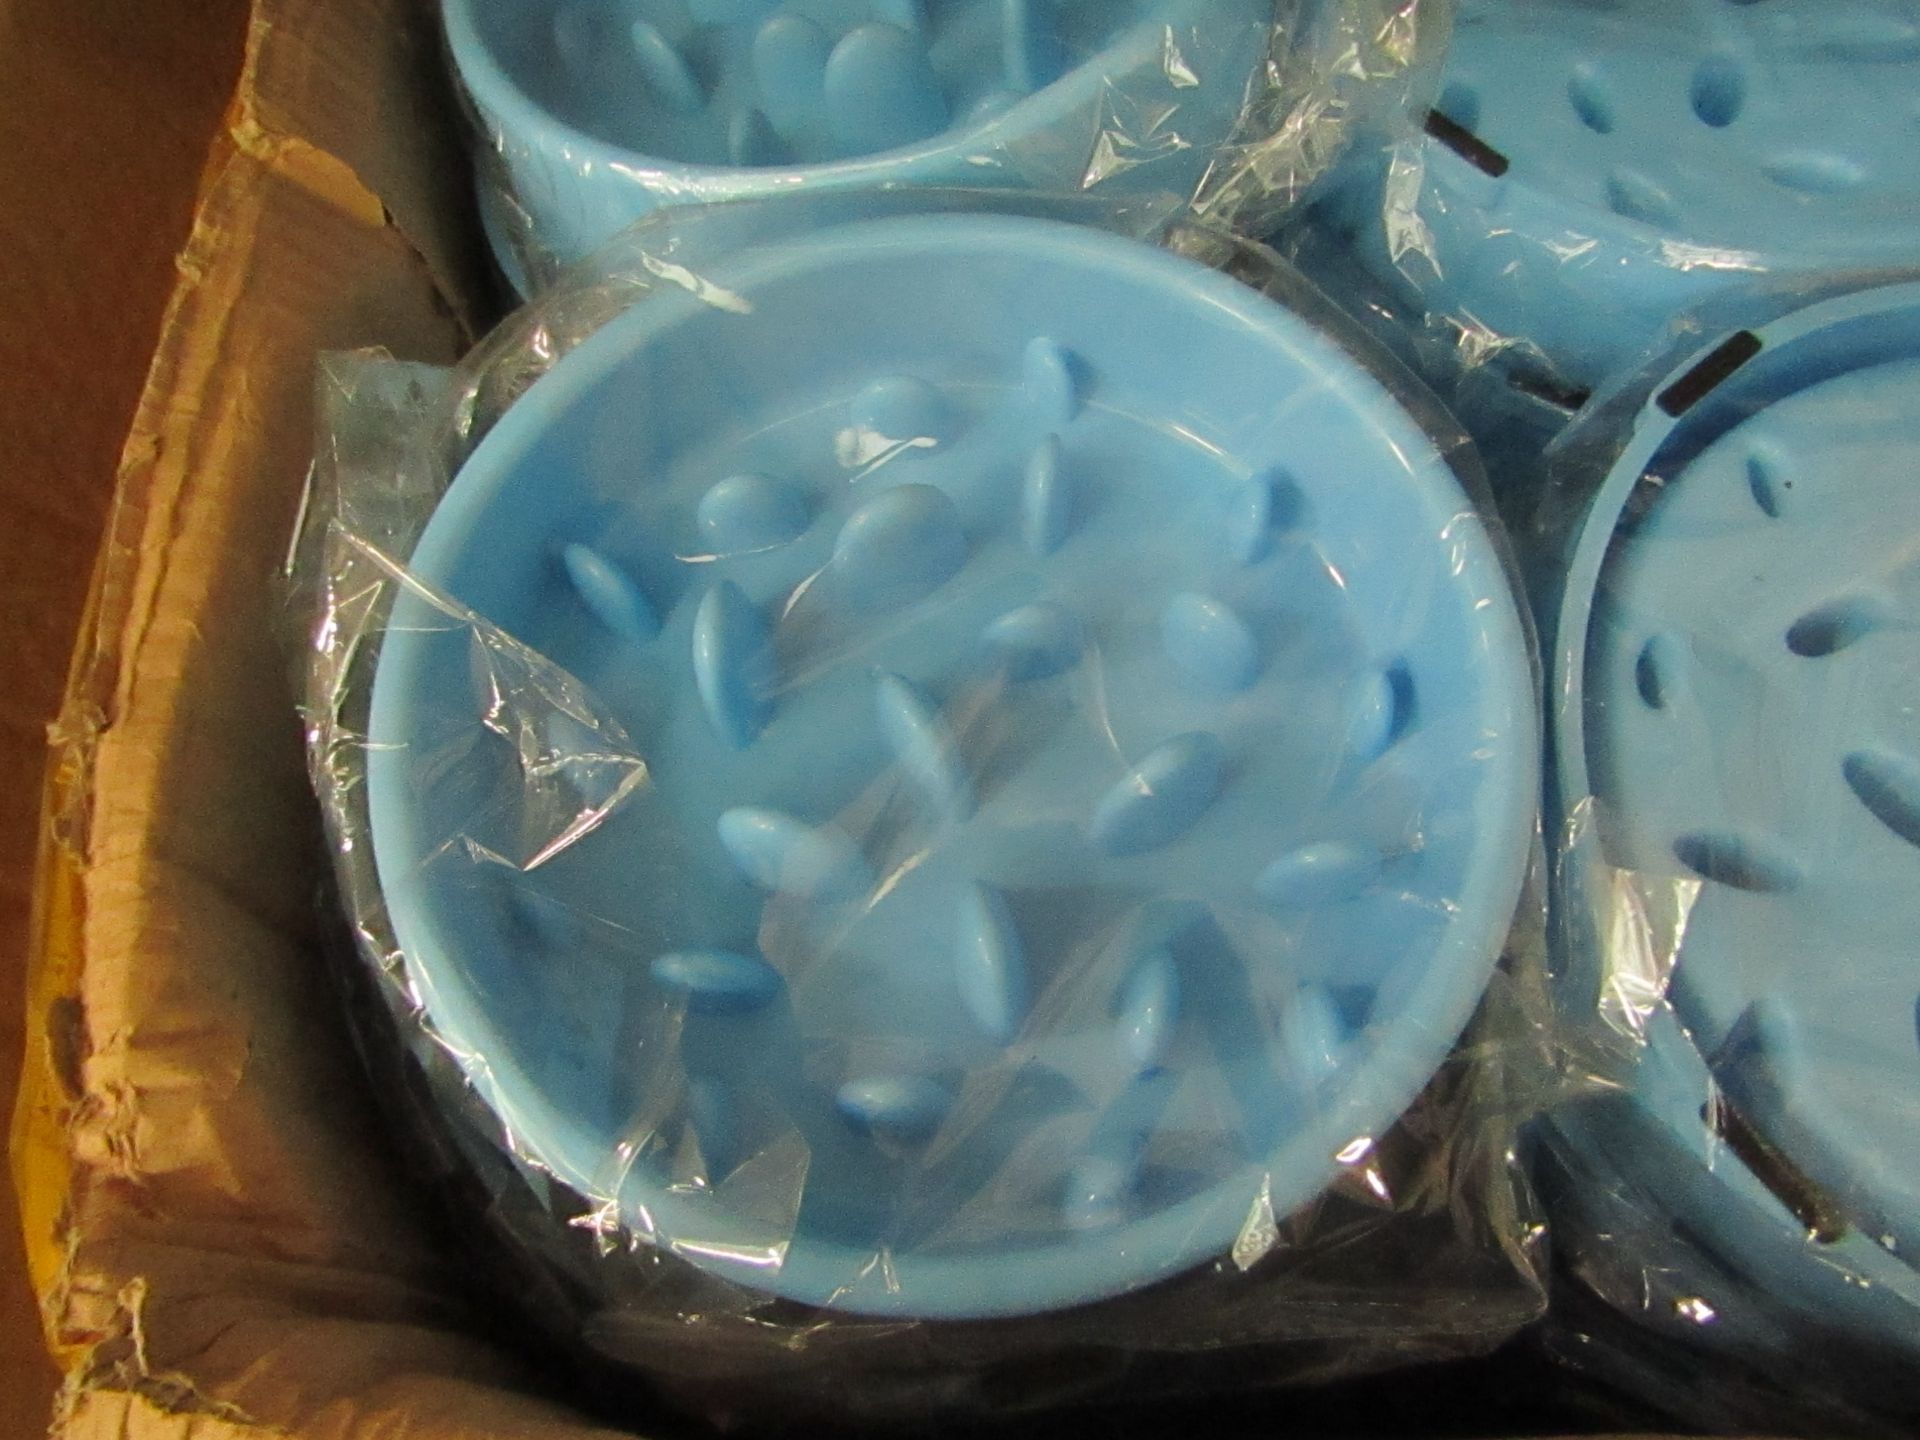 10 x Slow Feed Dog Bowls. New & Packaged. RRP £6.99 Each - Image 2 of 2